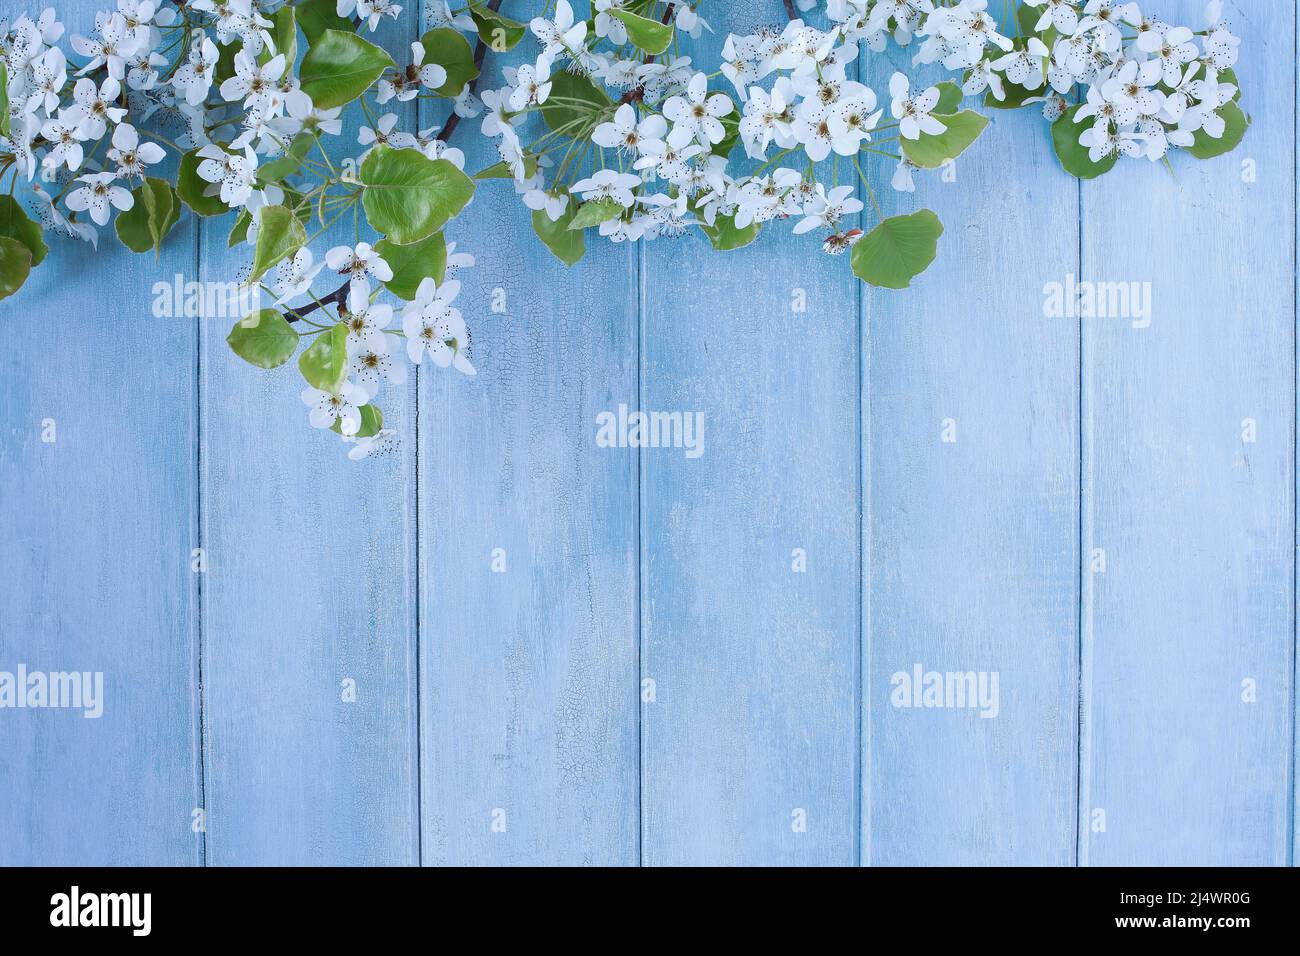 Beautiful spring tree blossoms against a peaceful blue rustic wooden background. Image shot from above in flat lay table top view. Stock Photo